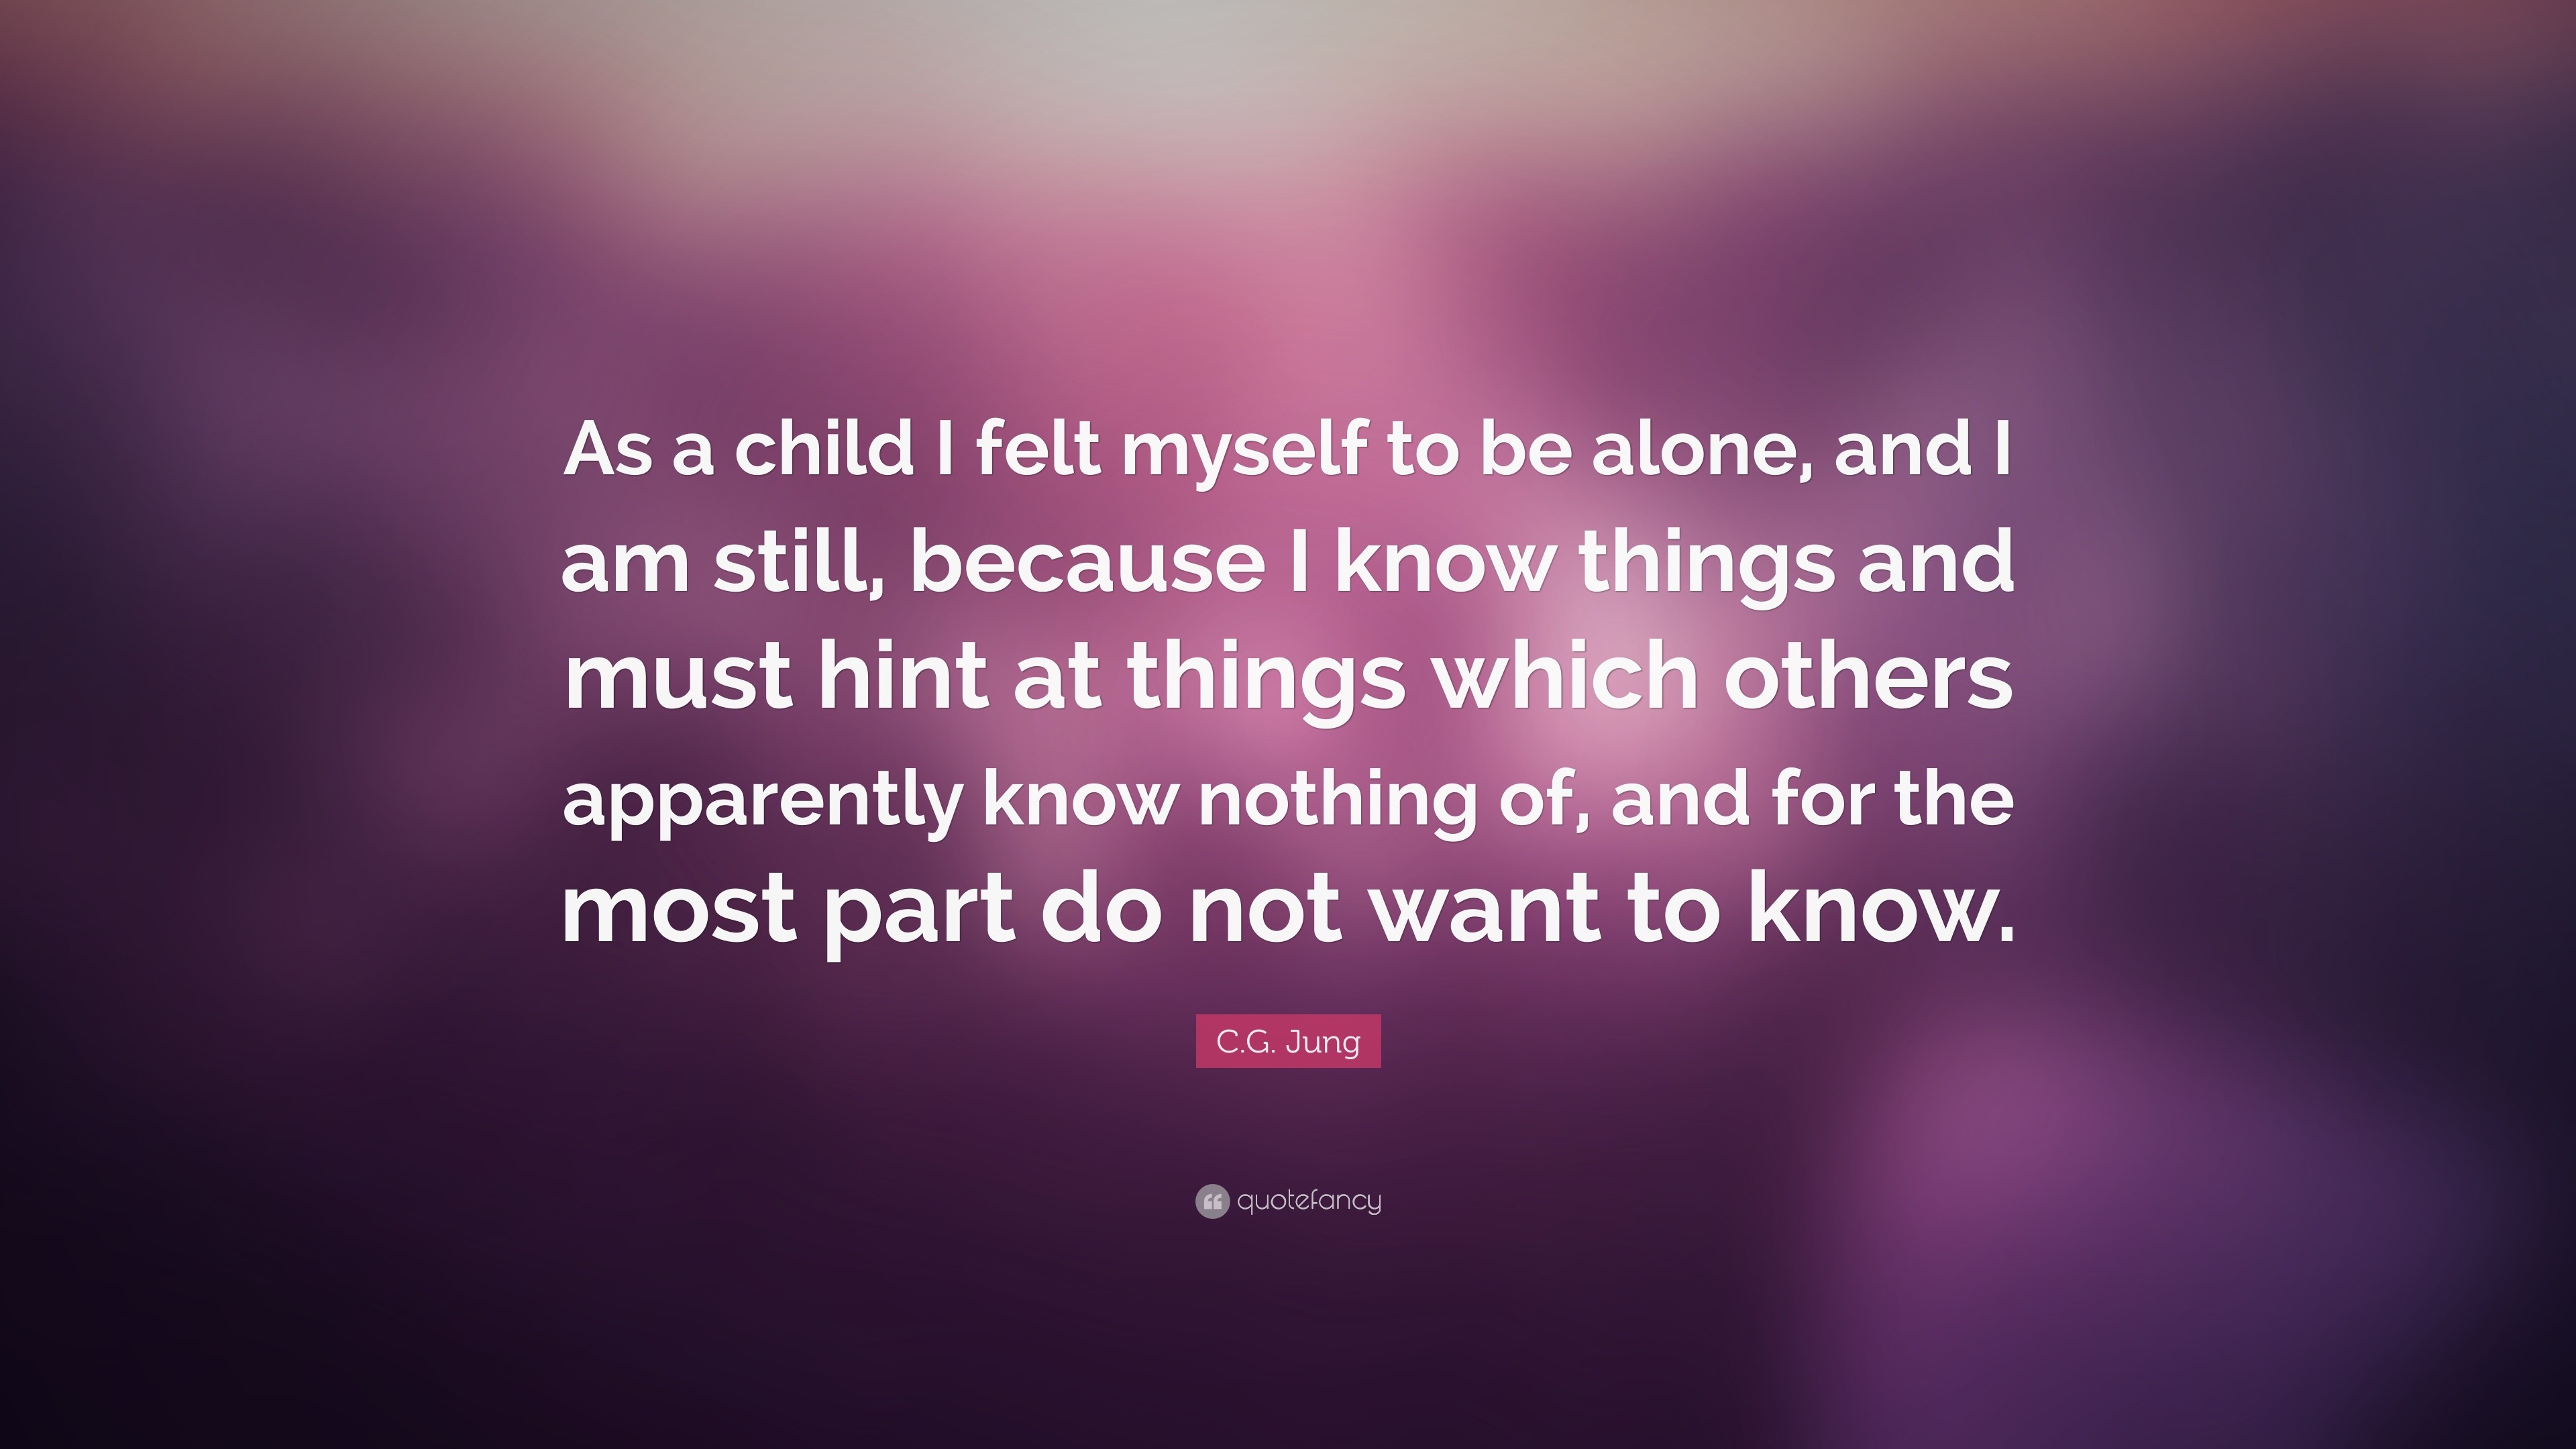 C.G. Jung Quote: “As a child I felt myself to be alone, and I am still ...